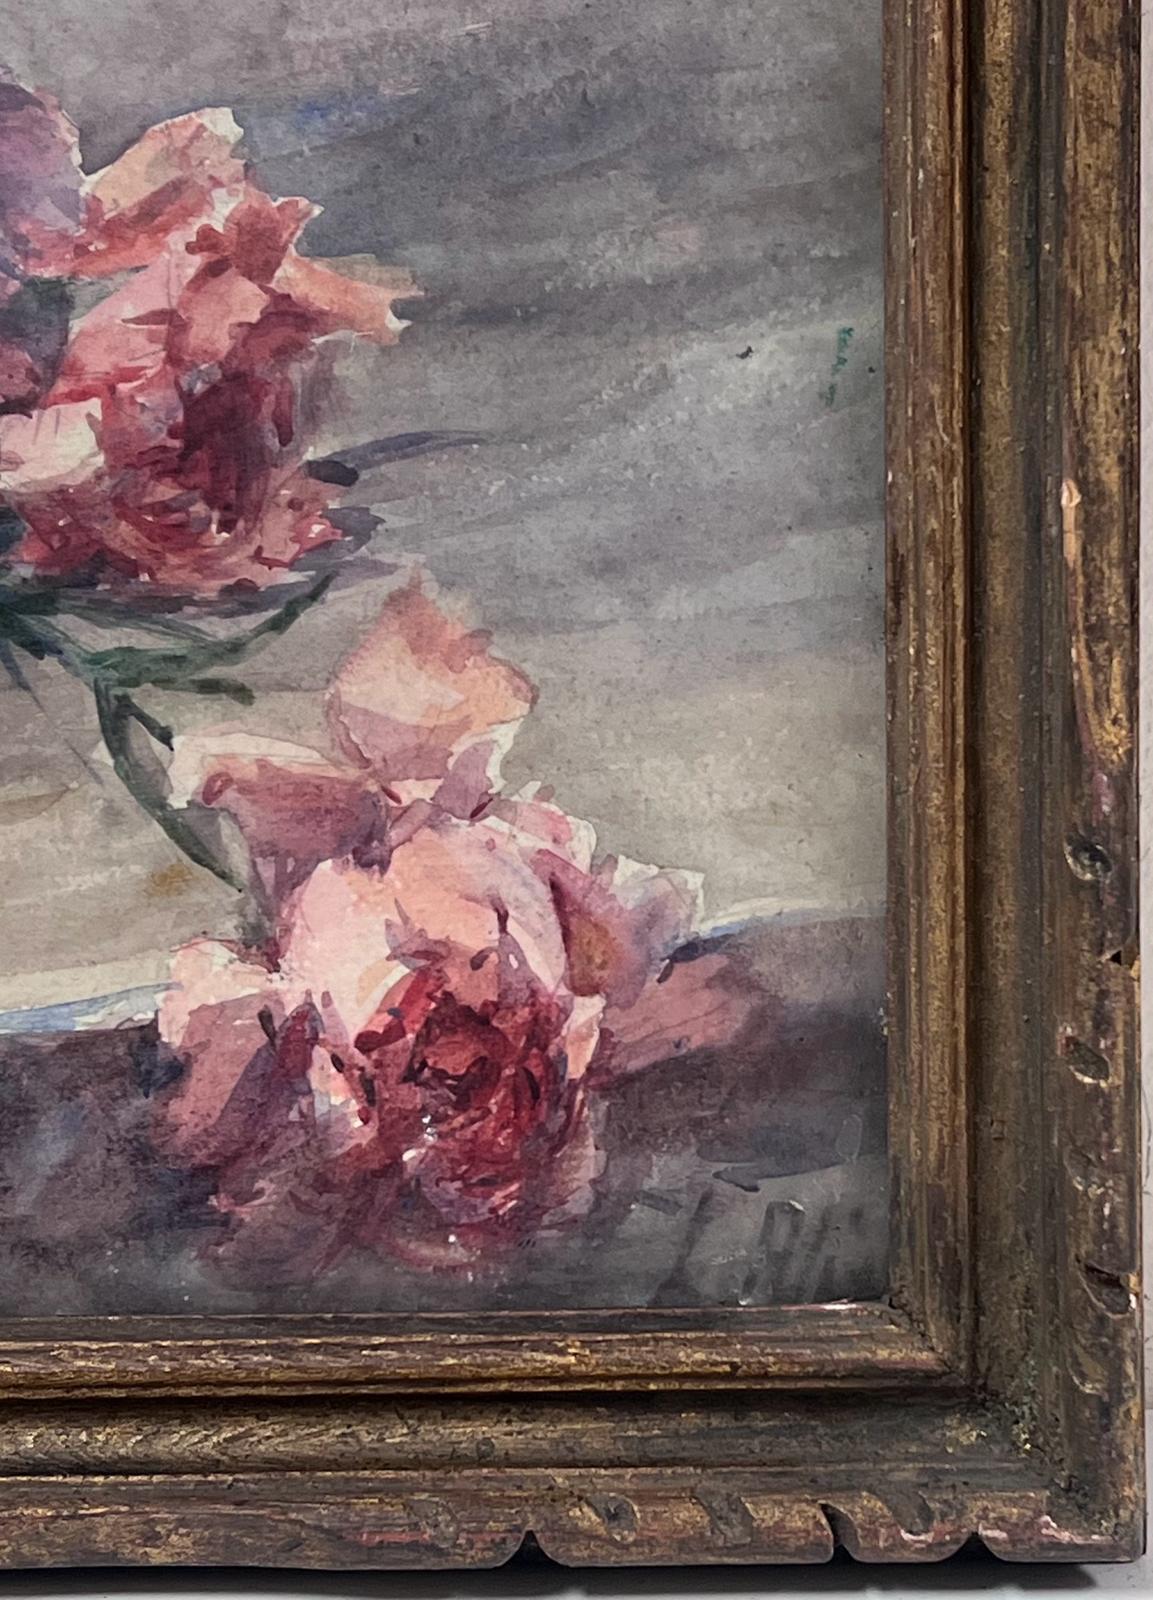 Flower Still Life
signed by Louise Alix, French 1950's Impressionist 
watercolour on artist paper stuck on board, framed
glass cover
frame: 11.5 x 14 inches
painting: 10 x 12.5 inches
provenance: from a large private collection of this artists work